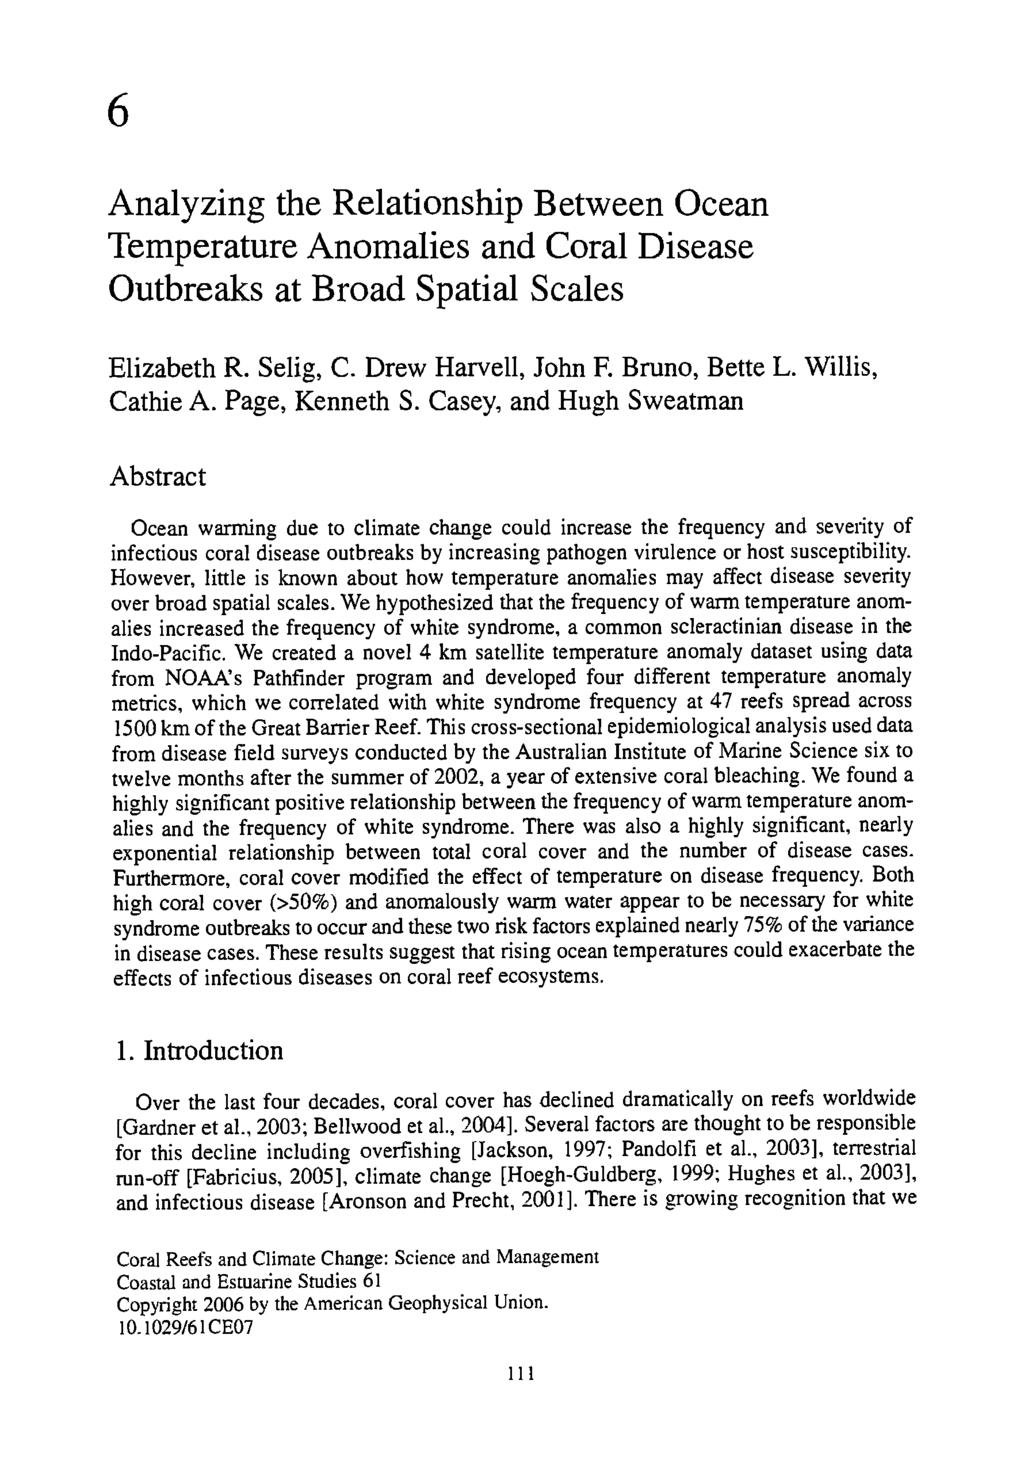 6 Analyzing the Relationship Between Ocean Temperature Anomalies and Coral Disease Outbreaks at Broad Spatial Scales Elizabeth R. Selig, C. Drew Harvell, John E Bruno, Bette L. Willis, Cathie A.